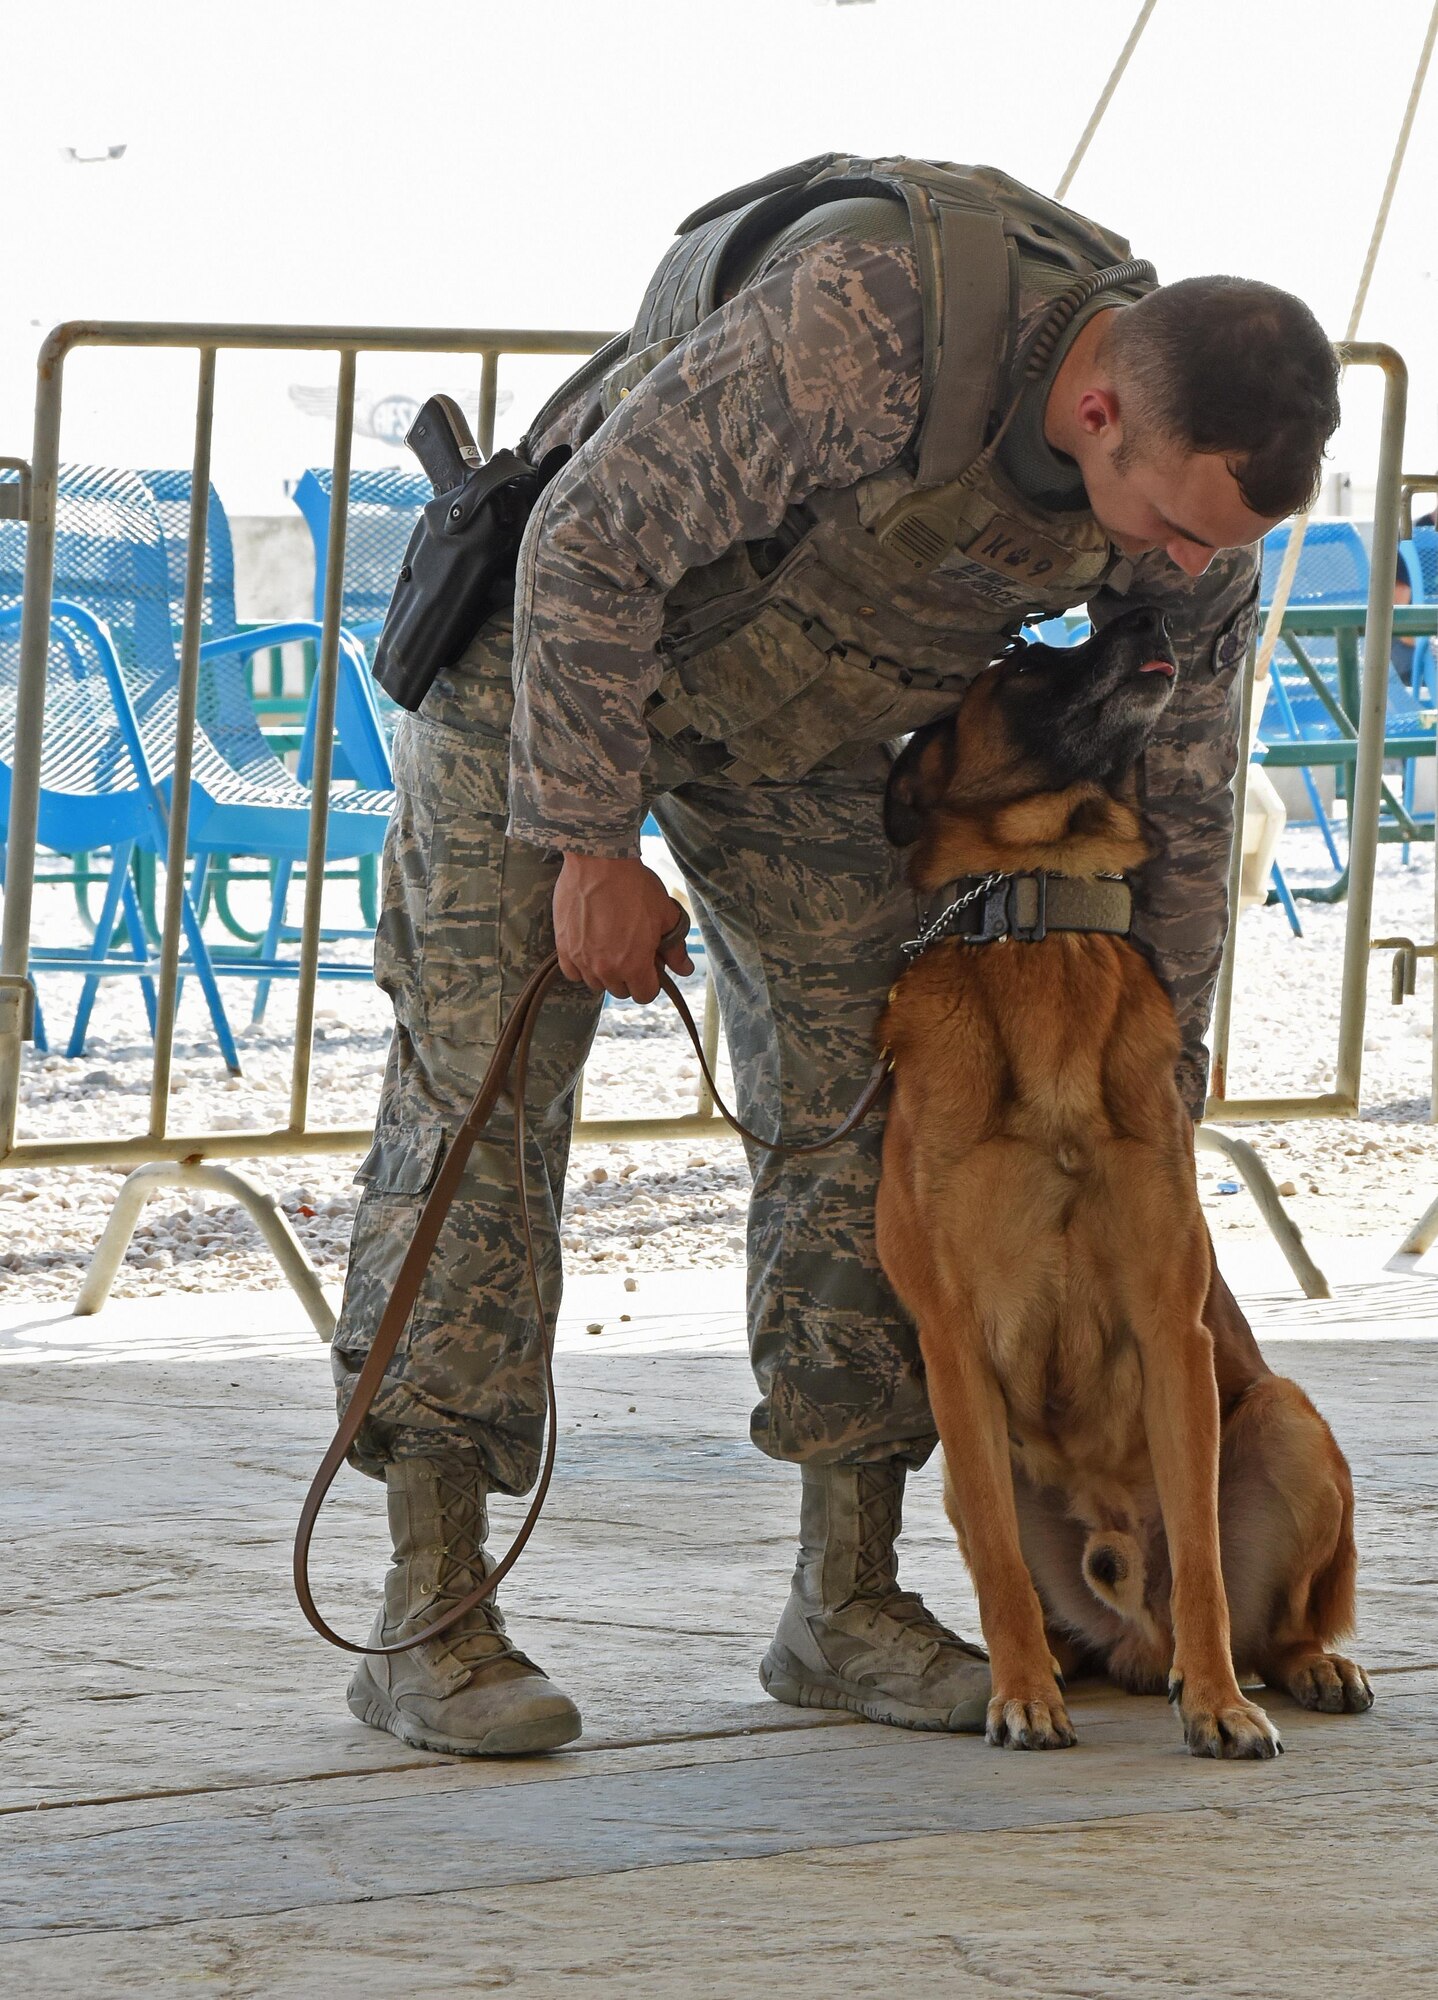 U.S. Air Force Senior Airman Jonathan Elder, a dog handler with the 379th Expeditionary Security Forces Squadron military working dog section, pets his assigned canine, Miki, during a Veterans Day MWD demonstration at Al Udeid Air Base, Qatar, Nov. 11, 2016. MWD handlers train with their canine partners daily to maintain basic skills. (U.S. Air Force photo by Senior Airman Cynthia A. Innocenti)